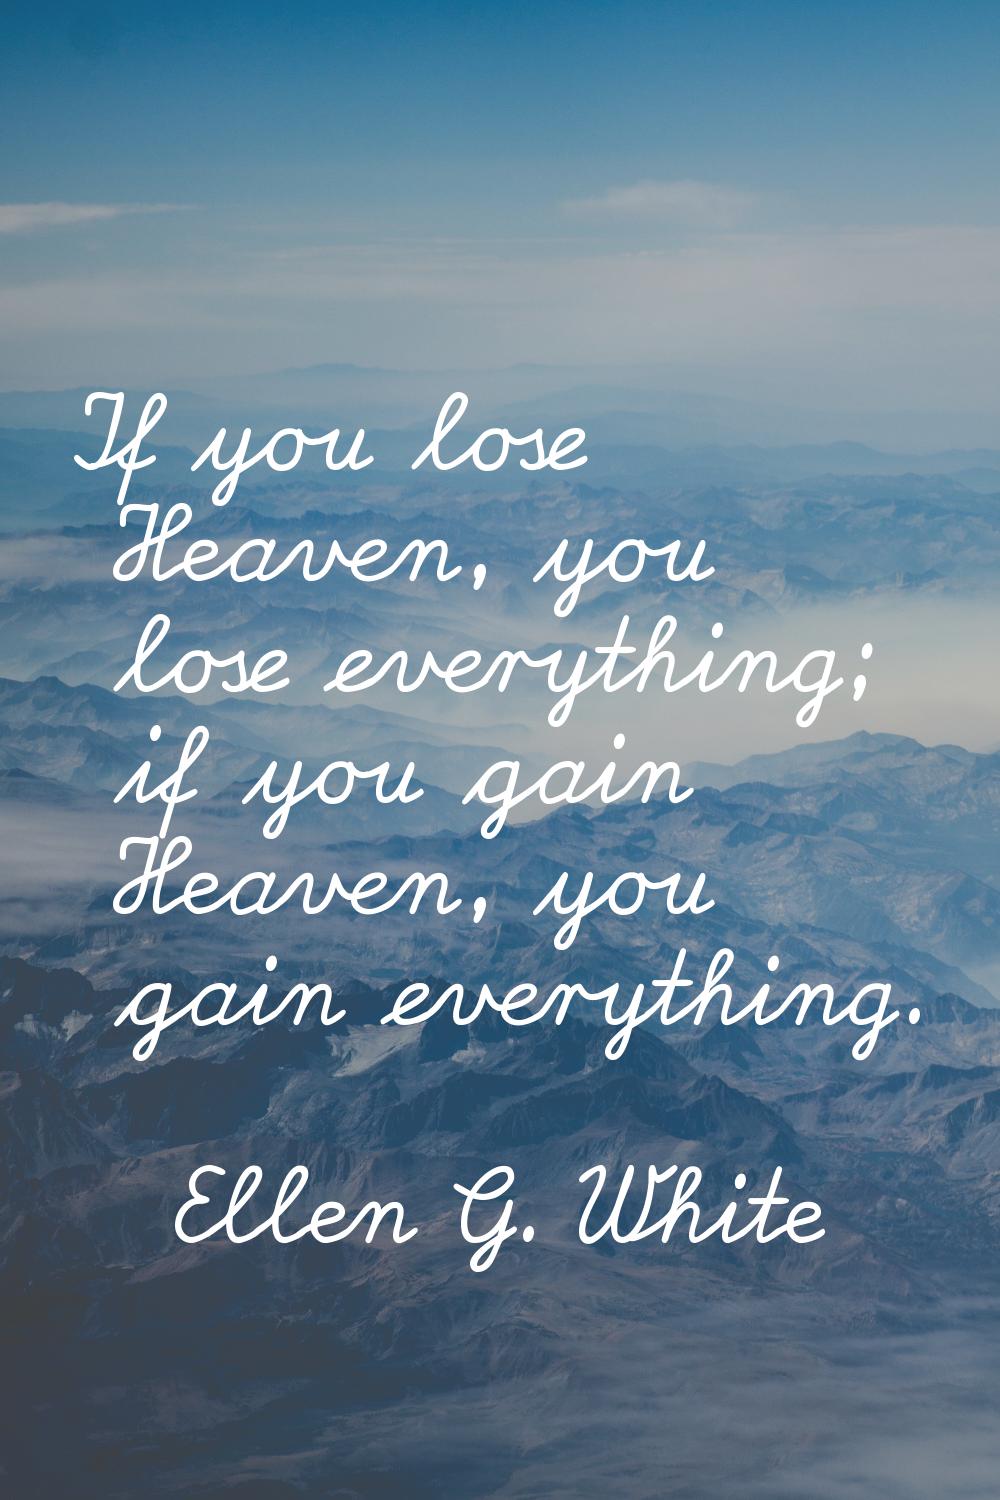 If you lose Heaven, you lose everything; if you gain Heaven, you gain everything.